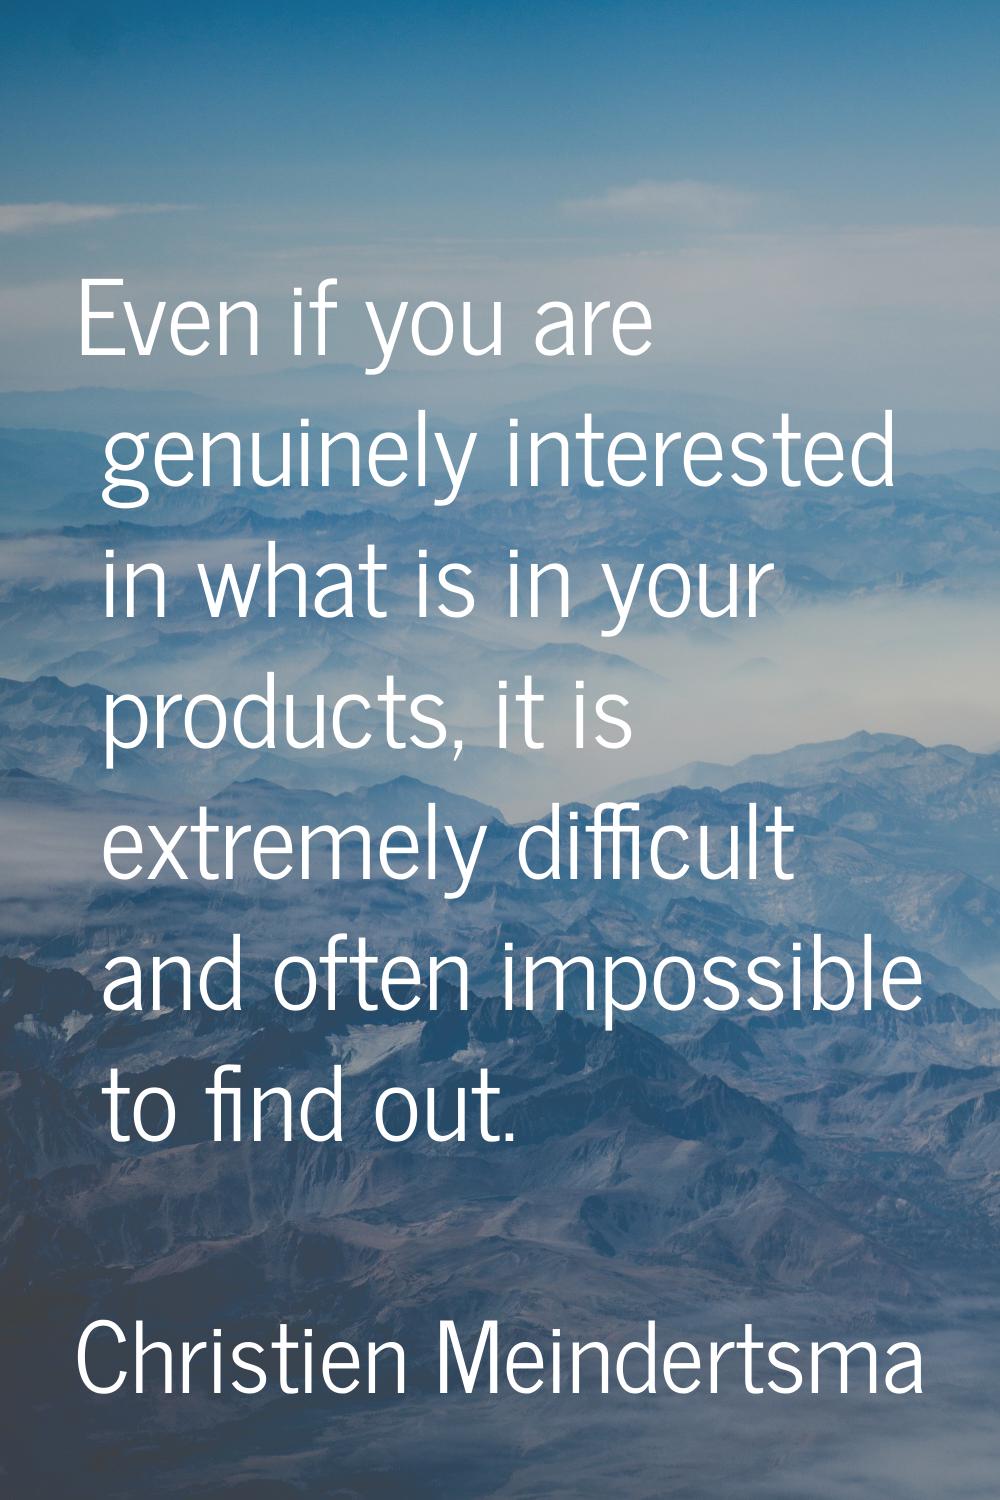 Even if you are genuinely interested in what is in your products, it is extremely difficult and oft